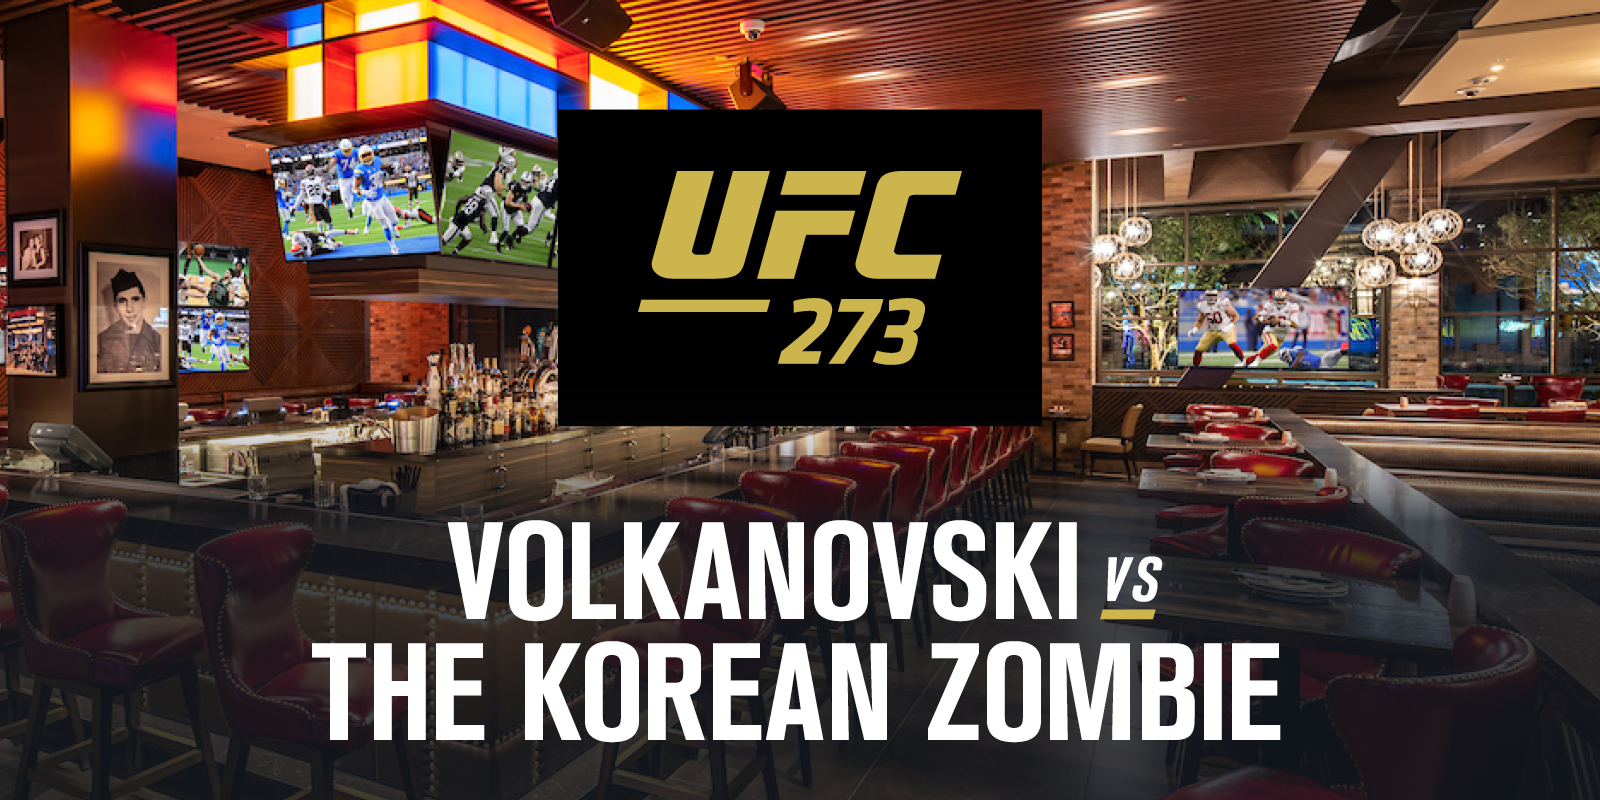 Chickie's & Pete's UFC 273 Promo visual that shows the restaurant in the background